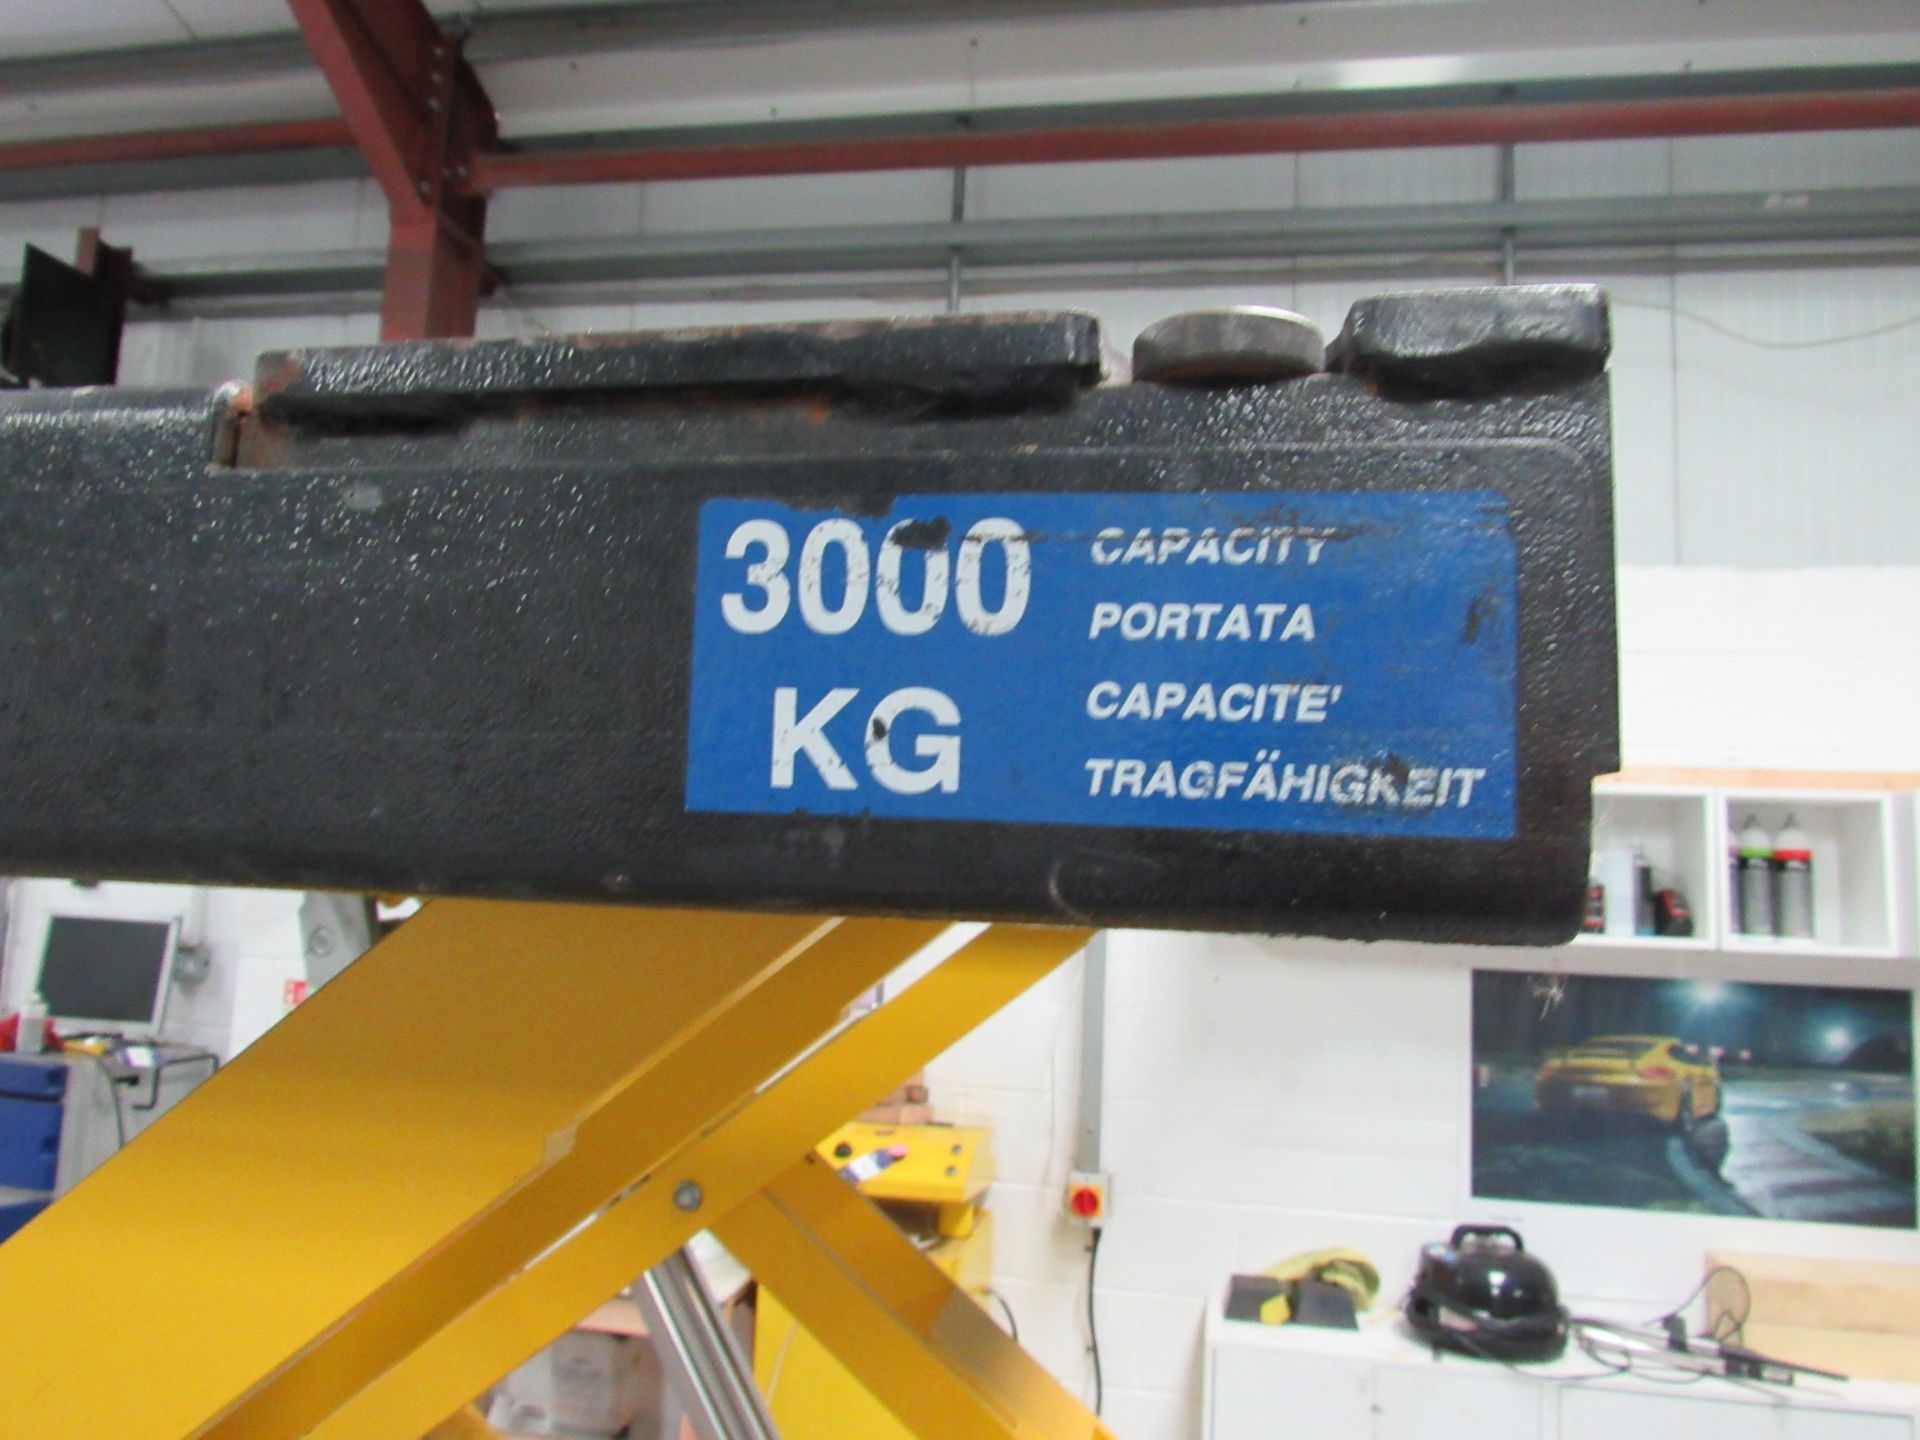 Rotary Porsche 3000kg Hydraulic Scissor Lift, Serial Number 5405274 (Located at Unit 11) - Image 5 of 5